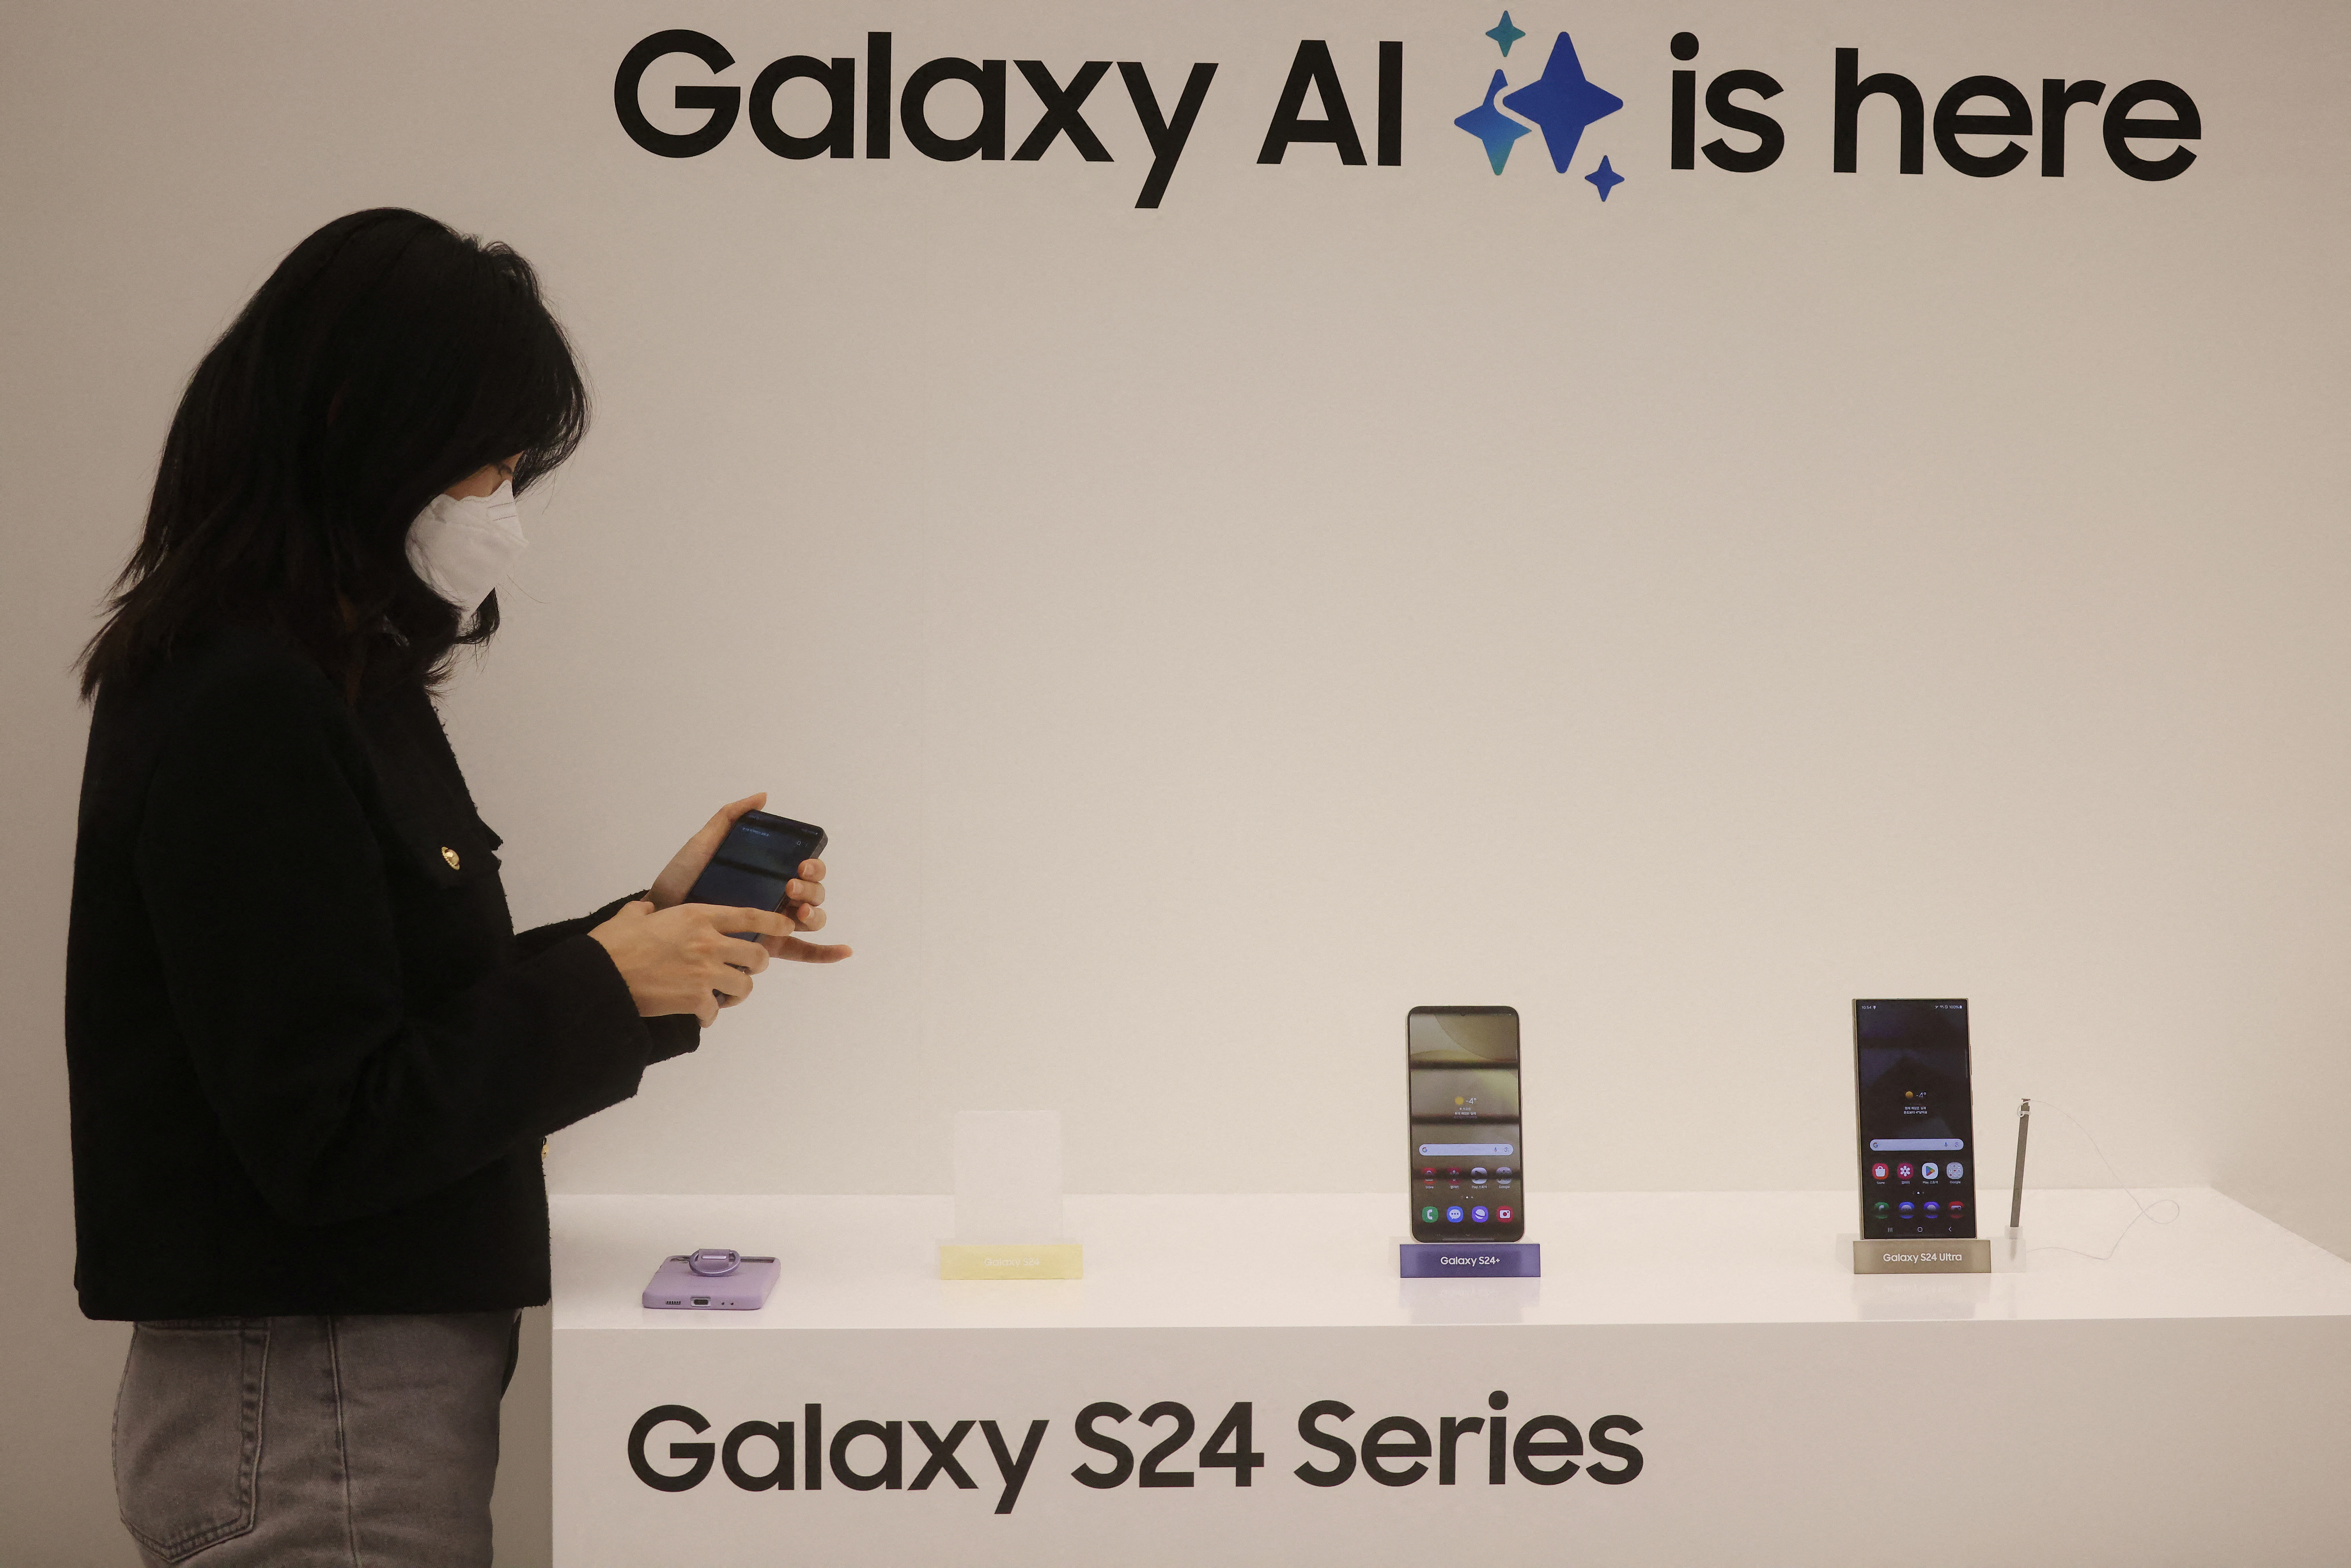 Samsung Galaxy S24 will arrive with improved AI capabilities